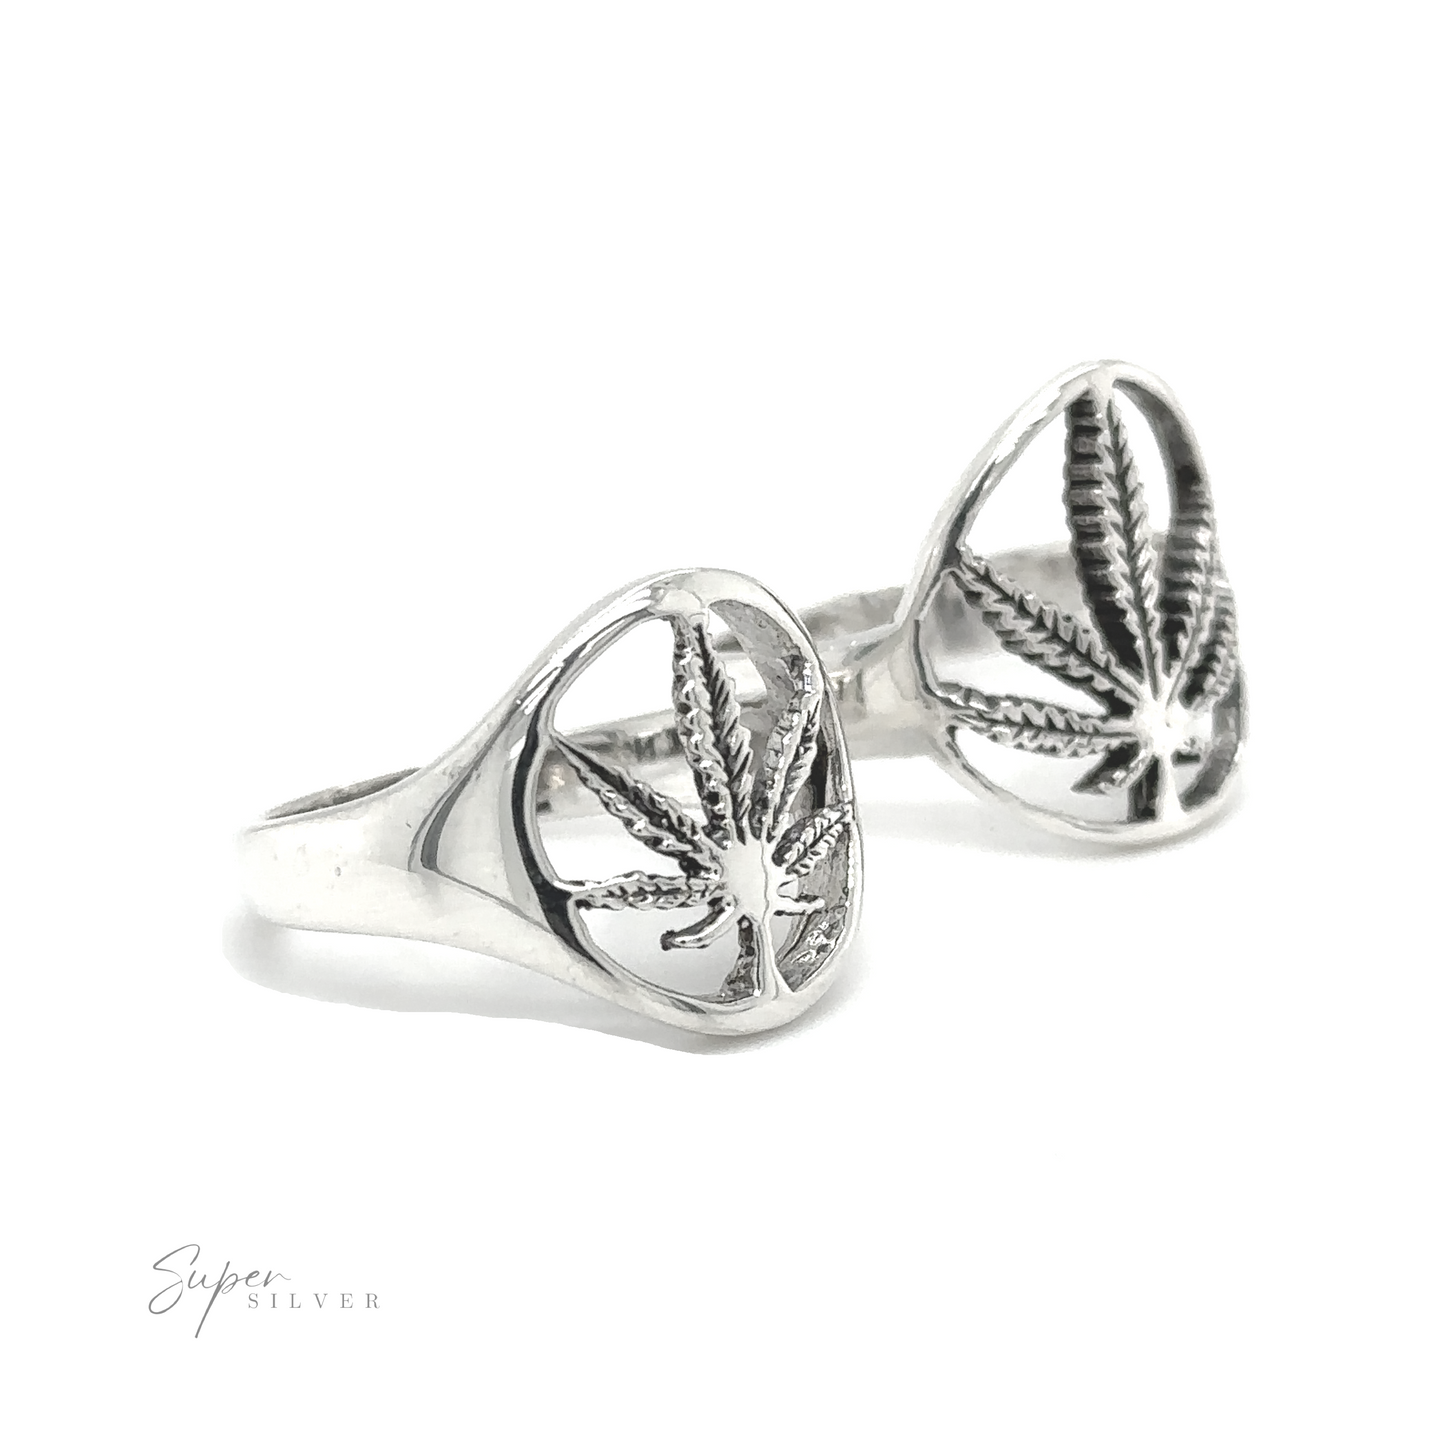 A pair of Outlined Mary Jane Leaf Rings with stoner vibes.